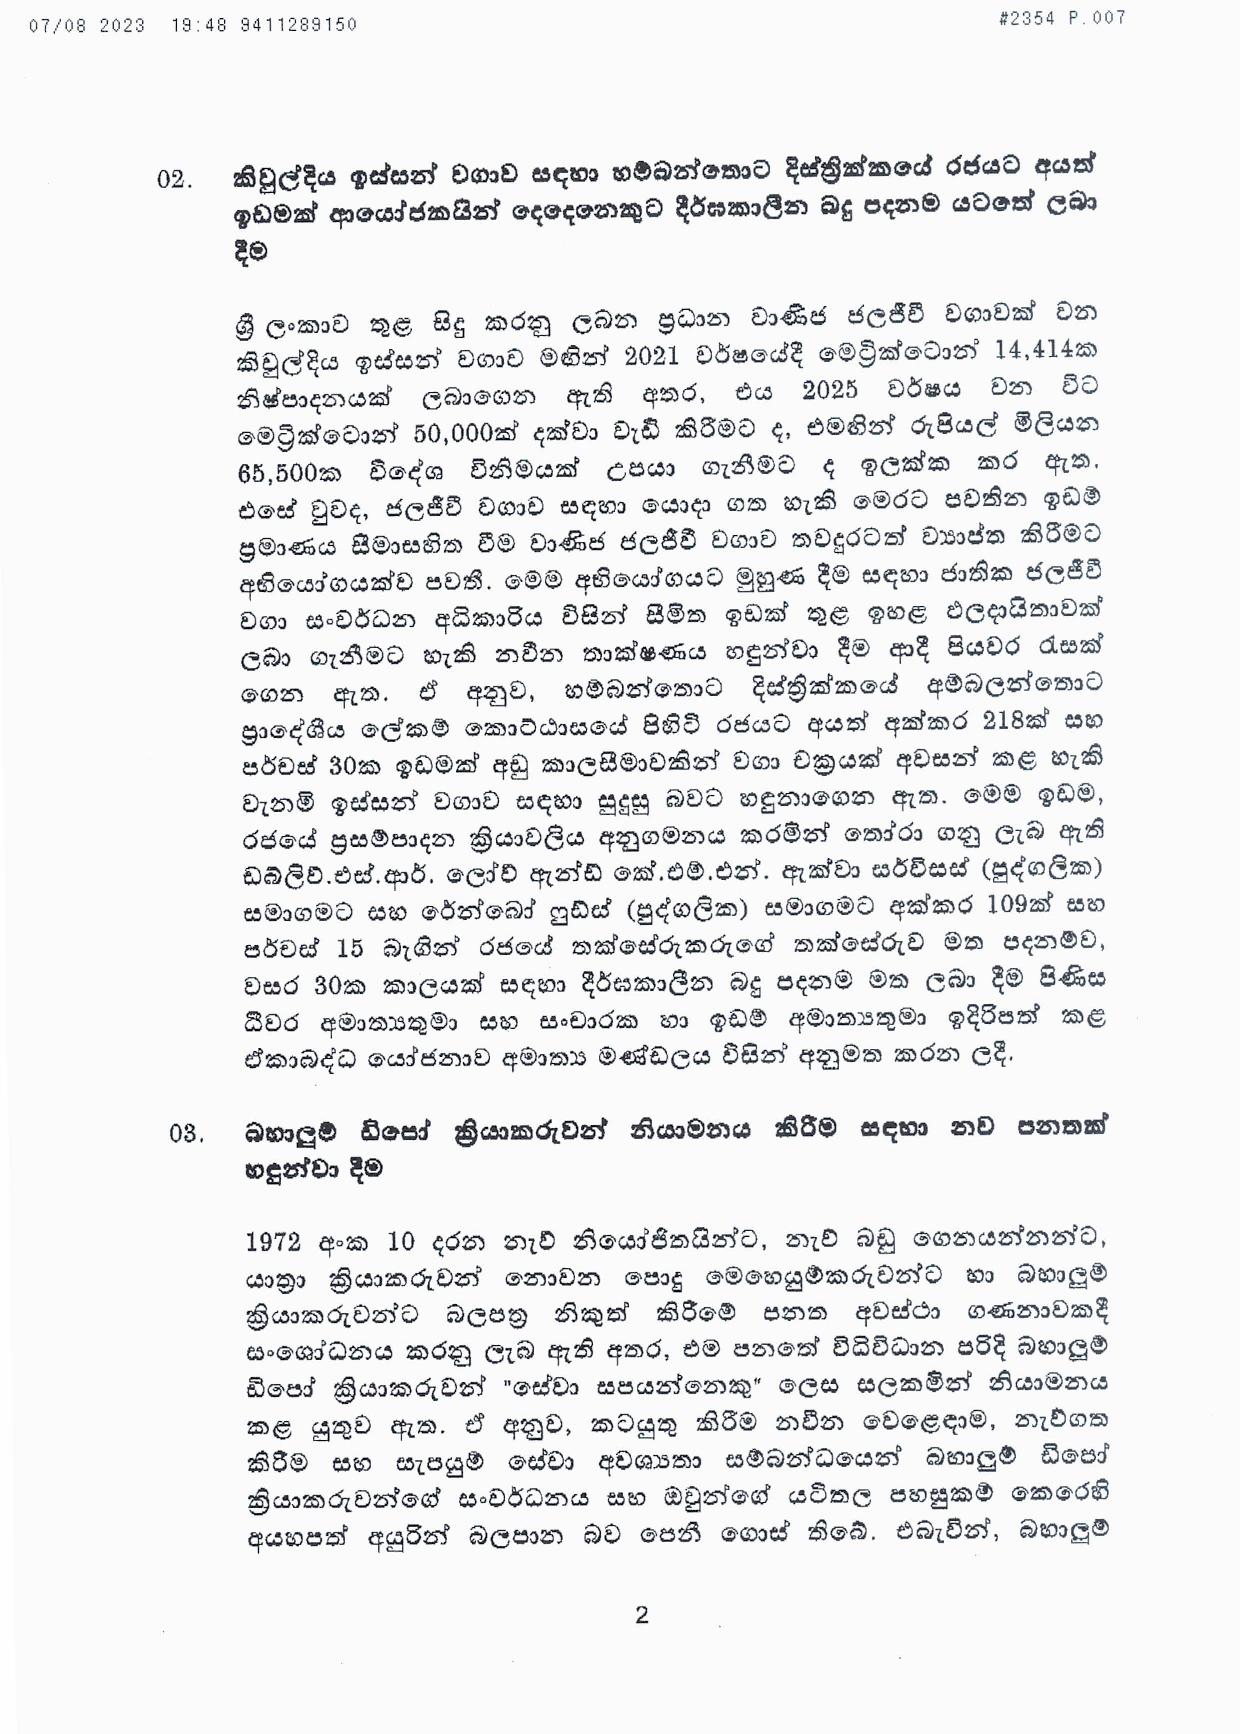 Cabinet Decision on 07.08.2023 page 002